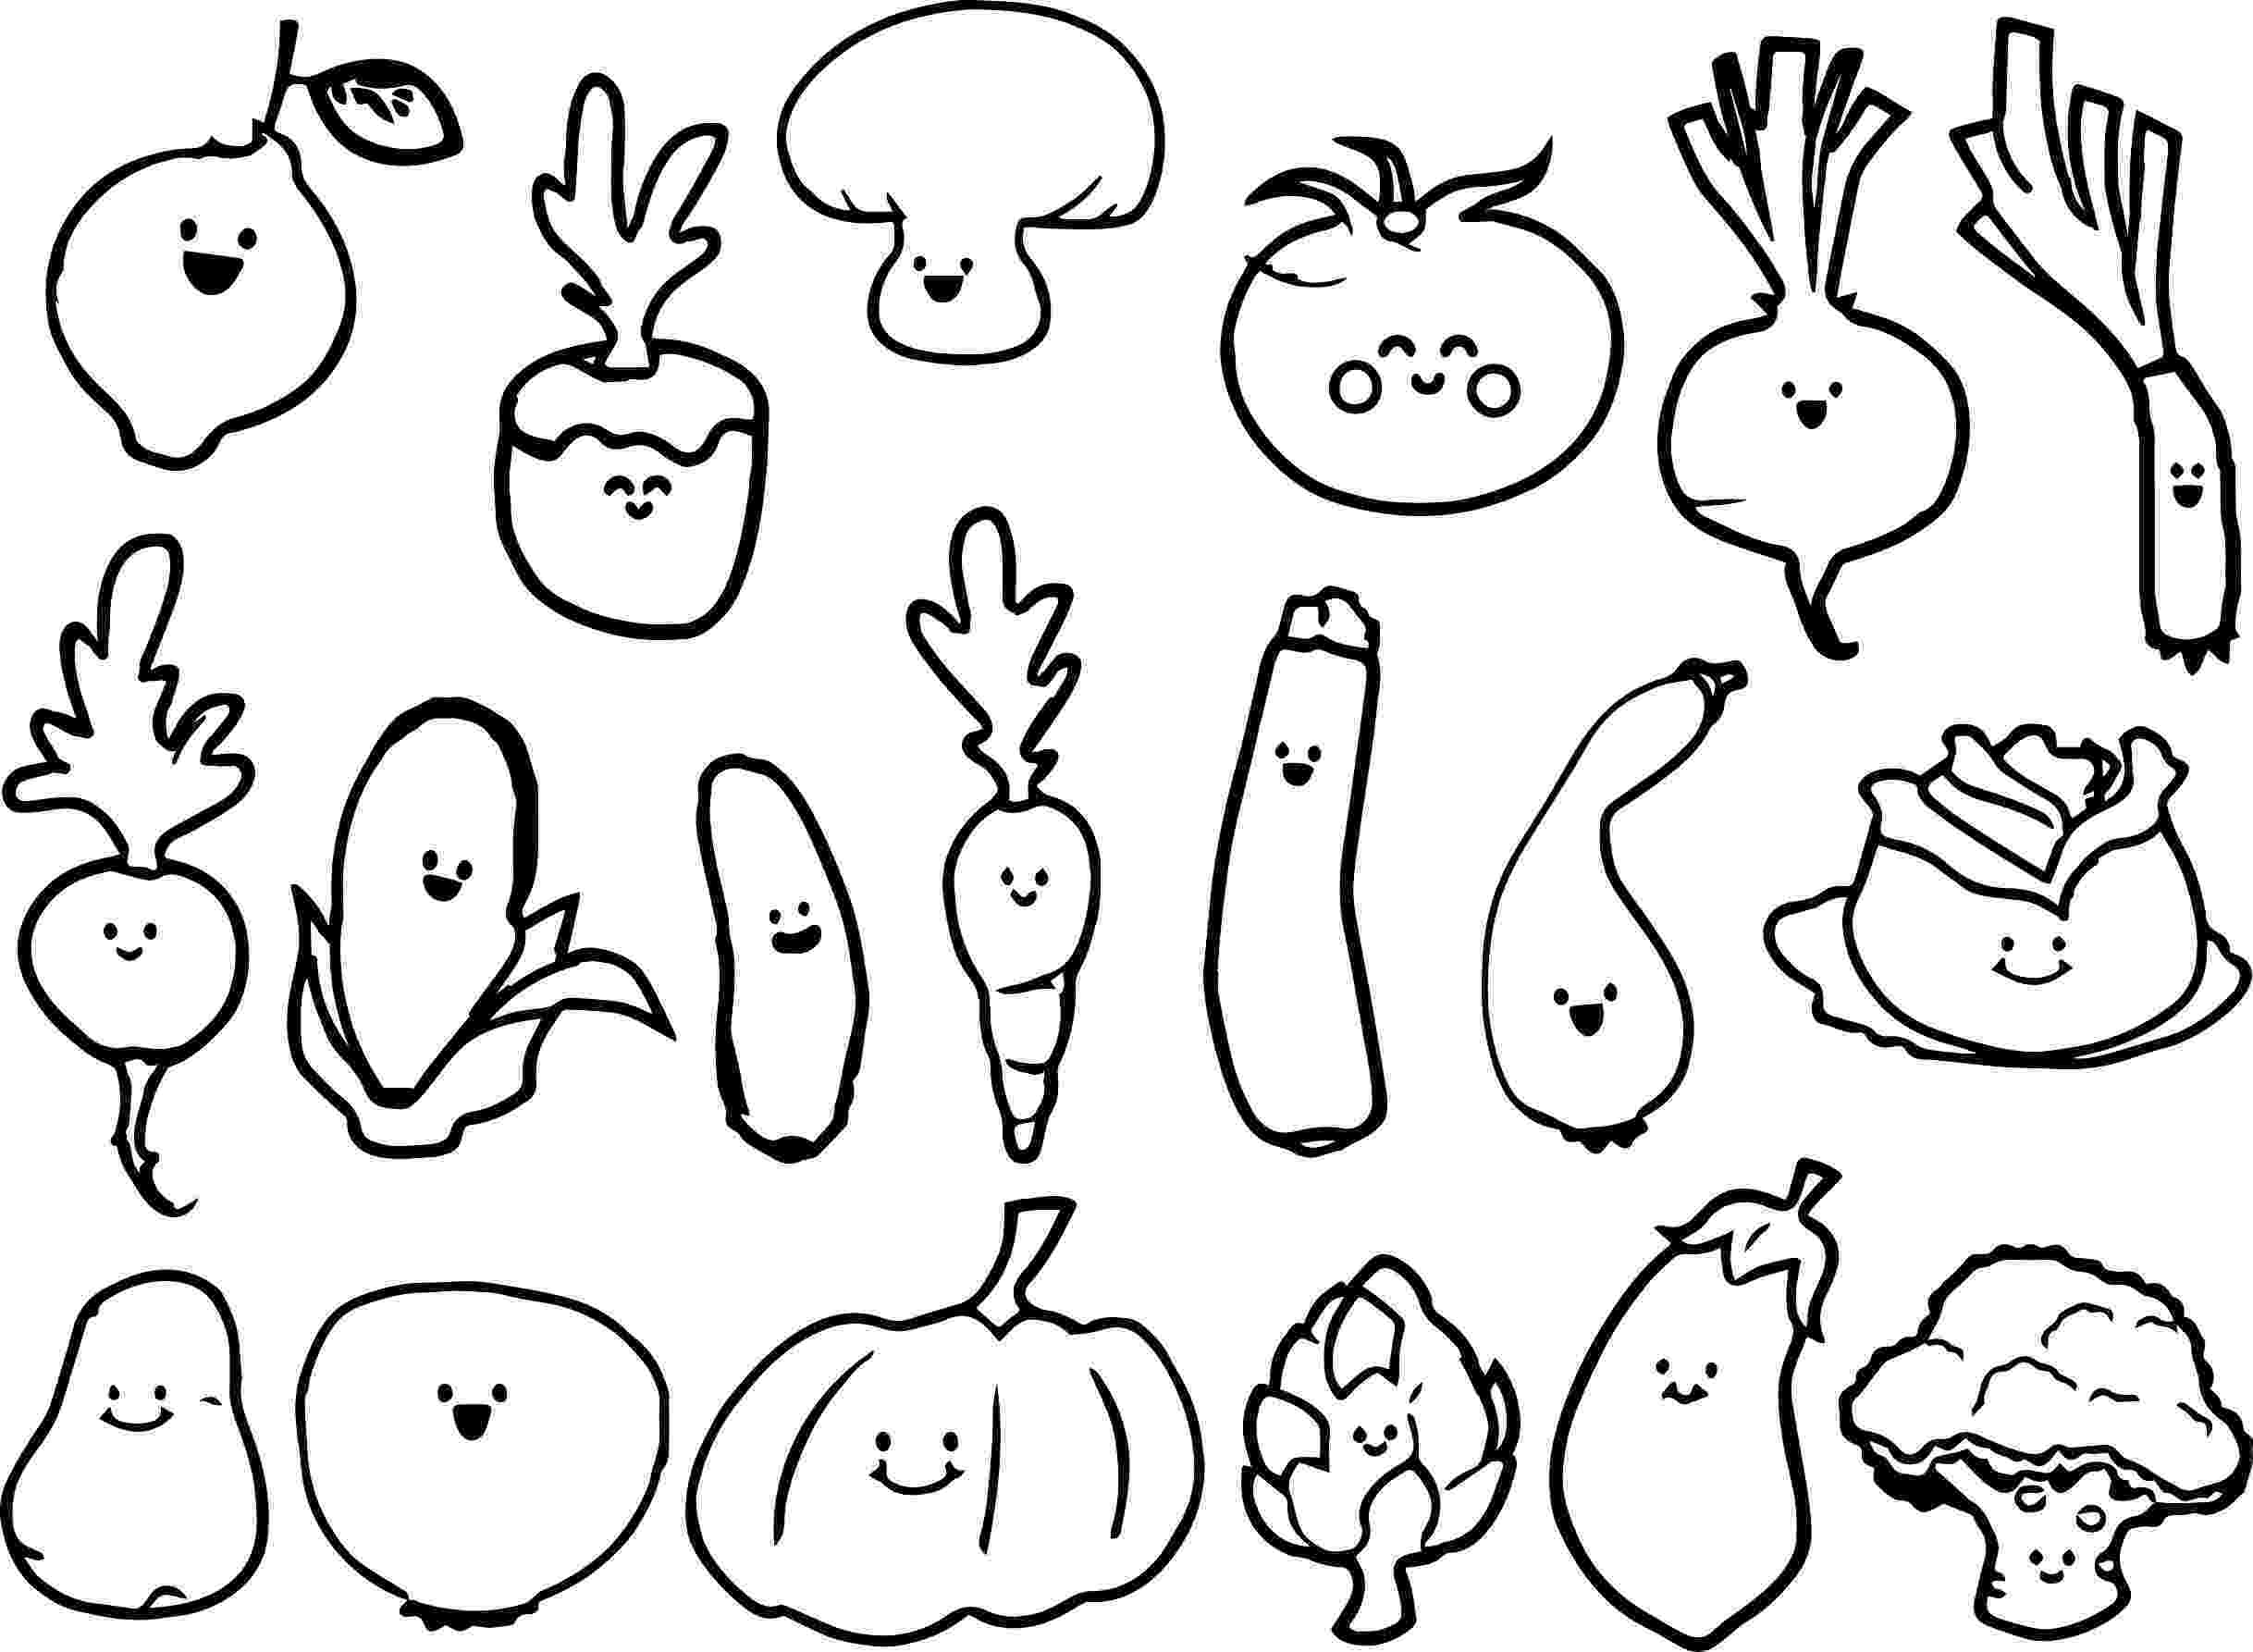 vegetable colouring pictures vegetables coloring pages getcoloringpagescom colouring vegetable pictures 